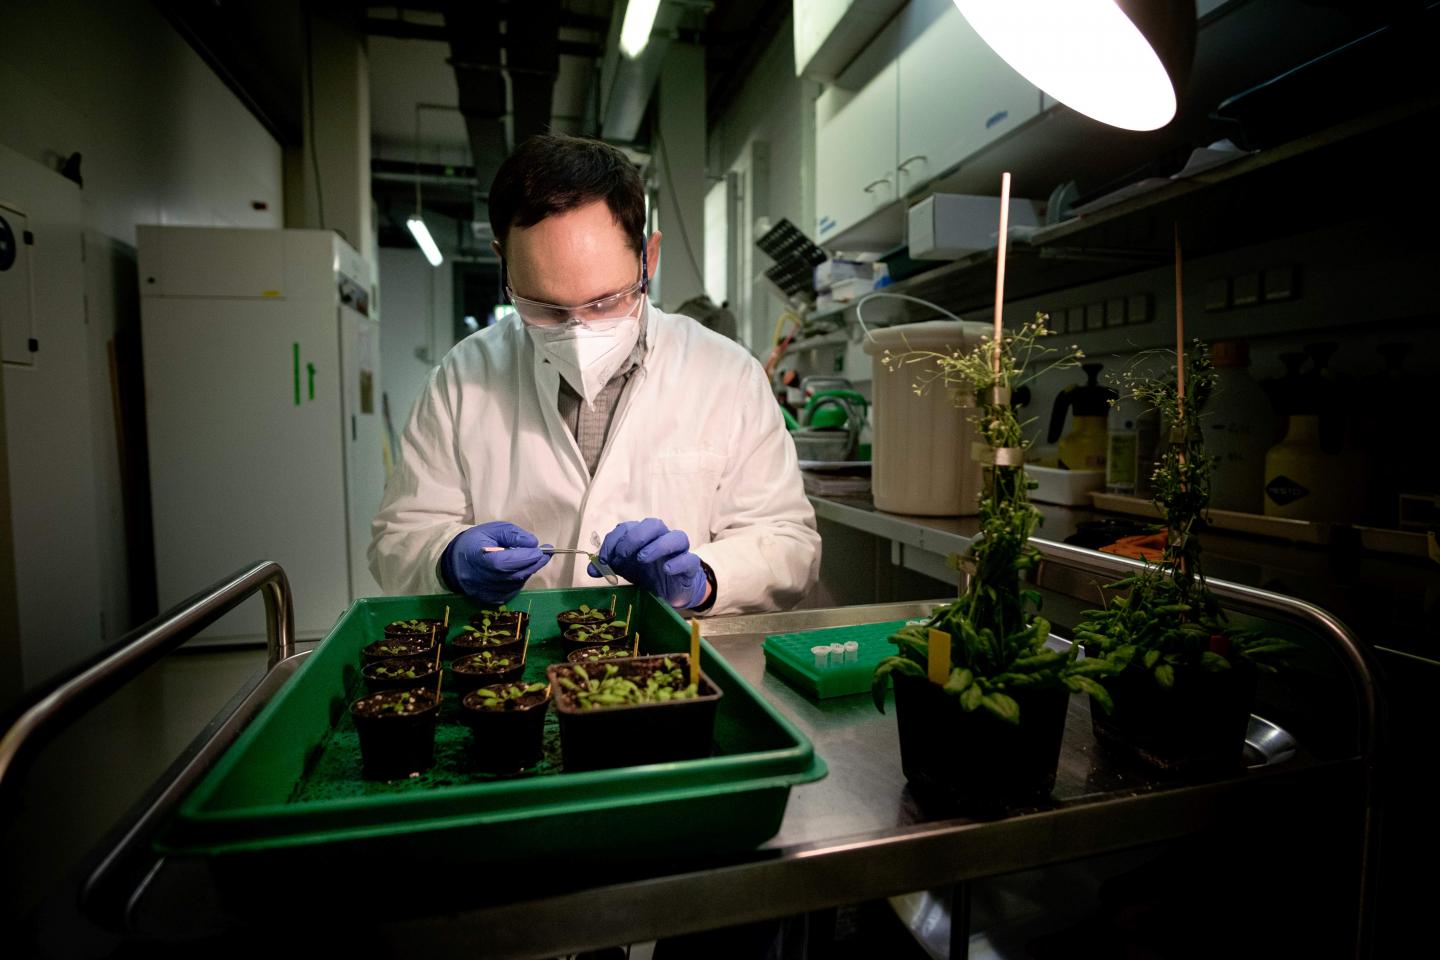 Researcher with Plants in a Laboratory